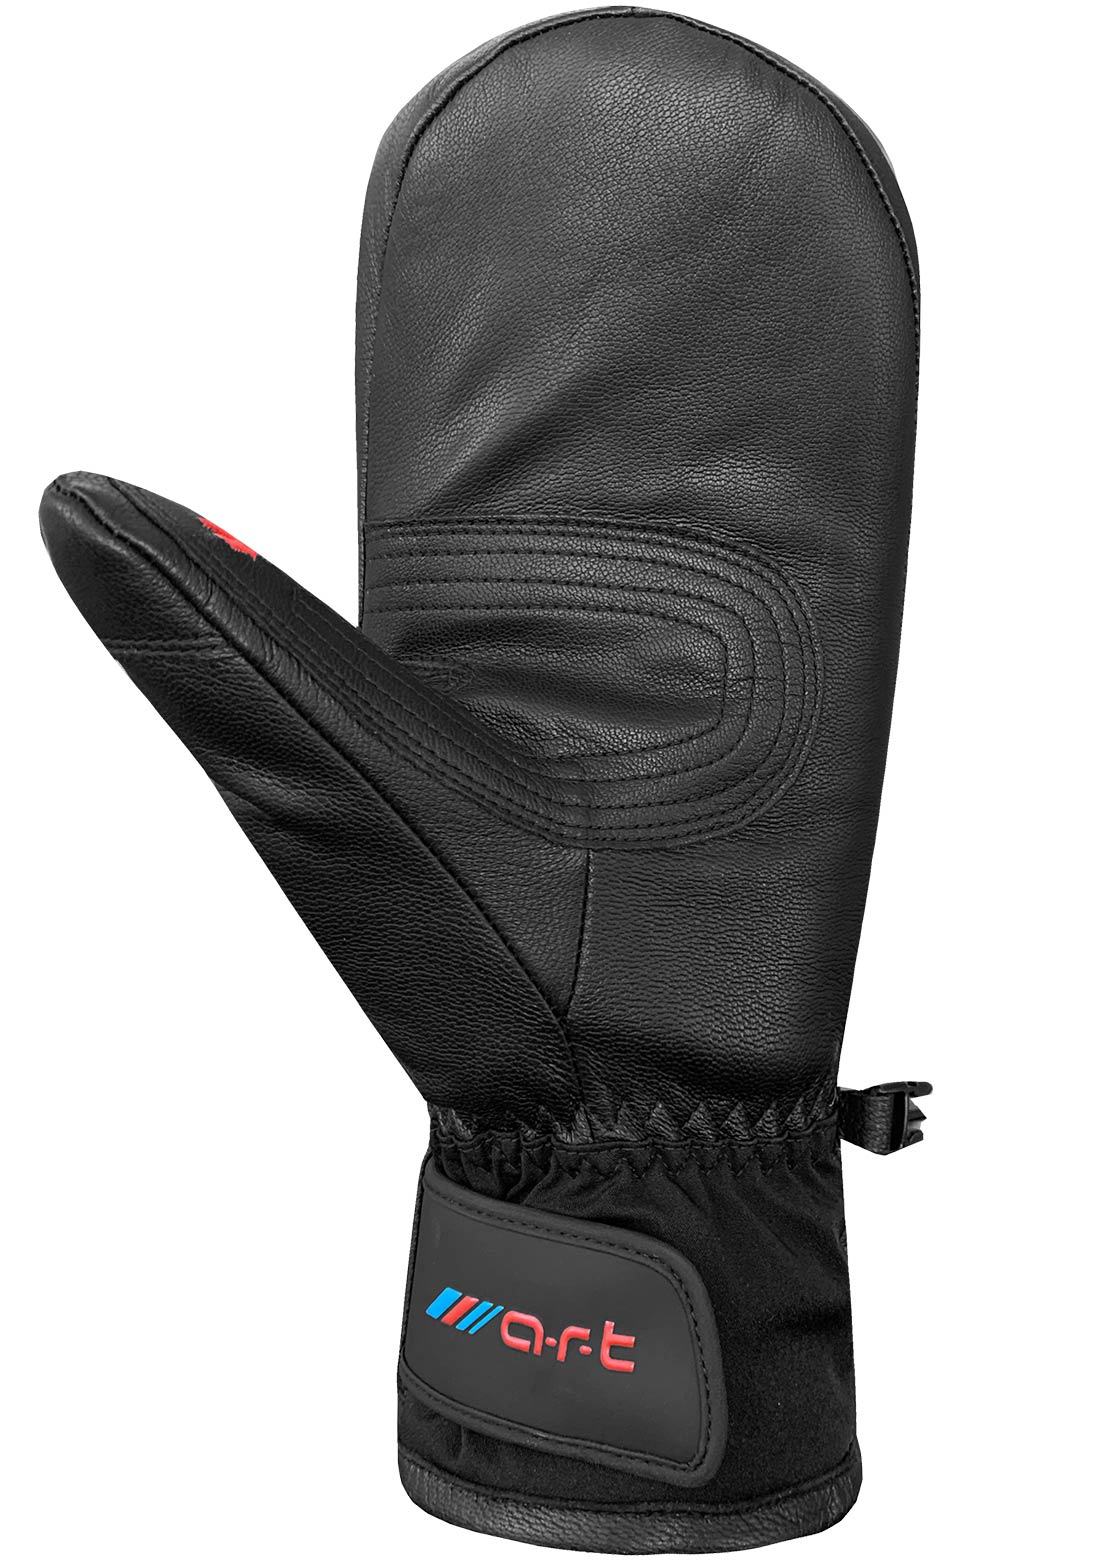 Auclair Son Of T 4 Mitts Black/Black